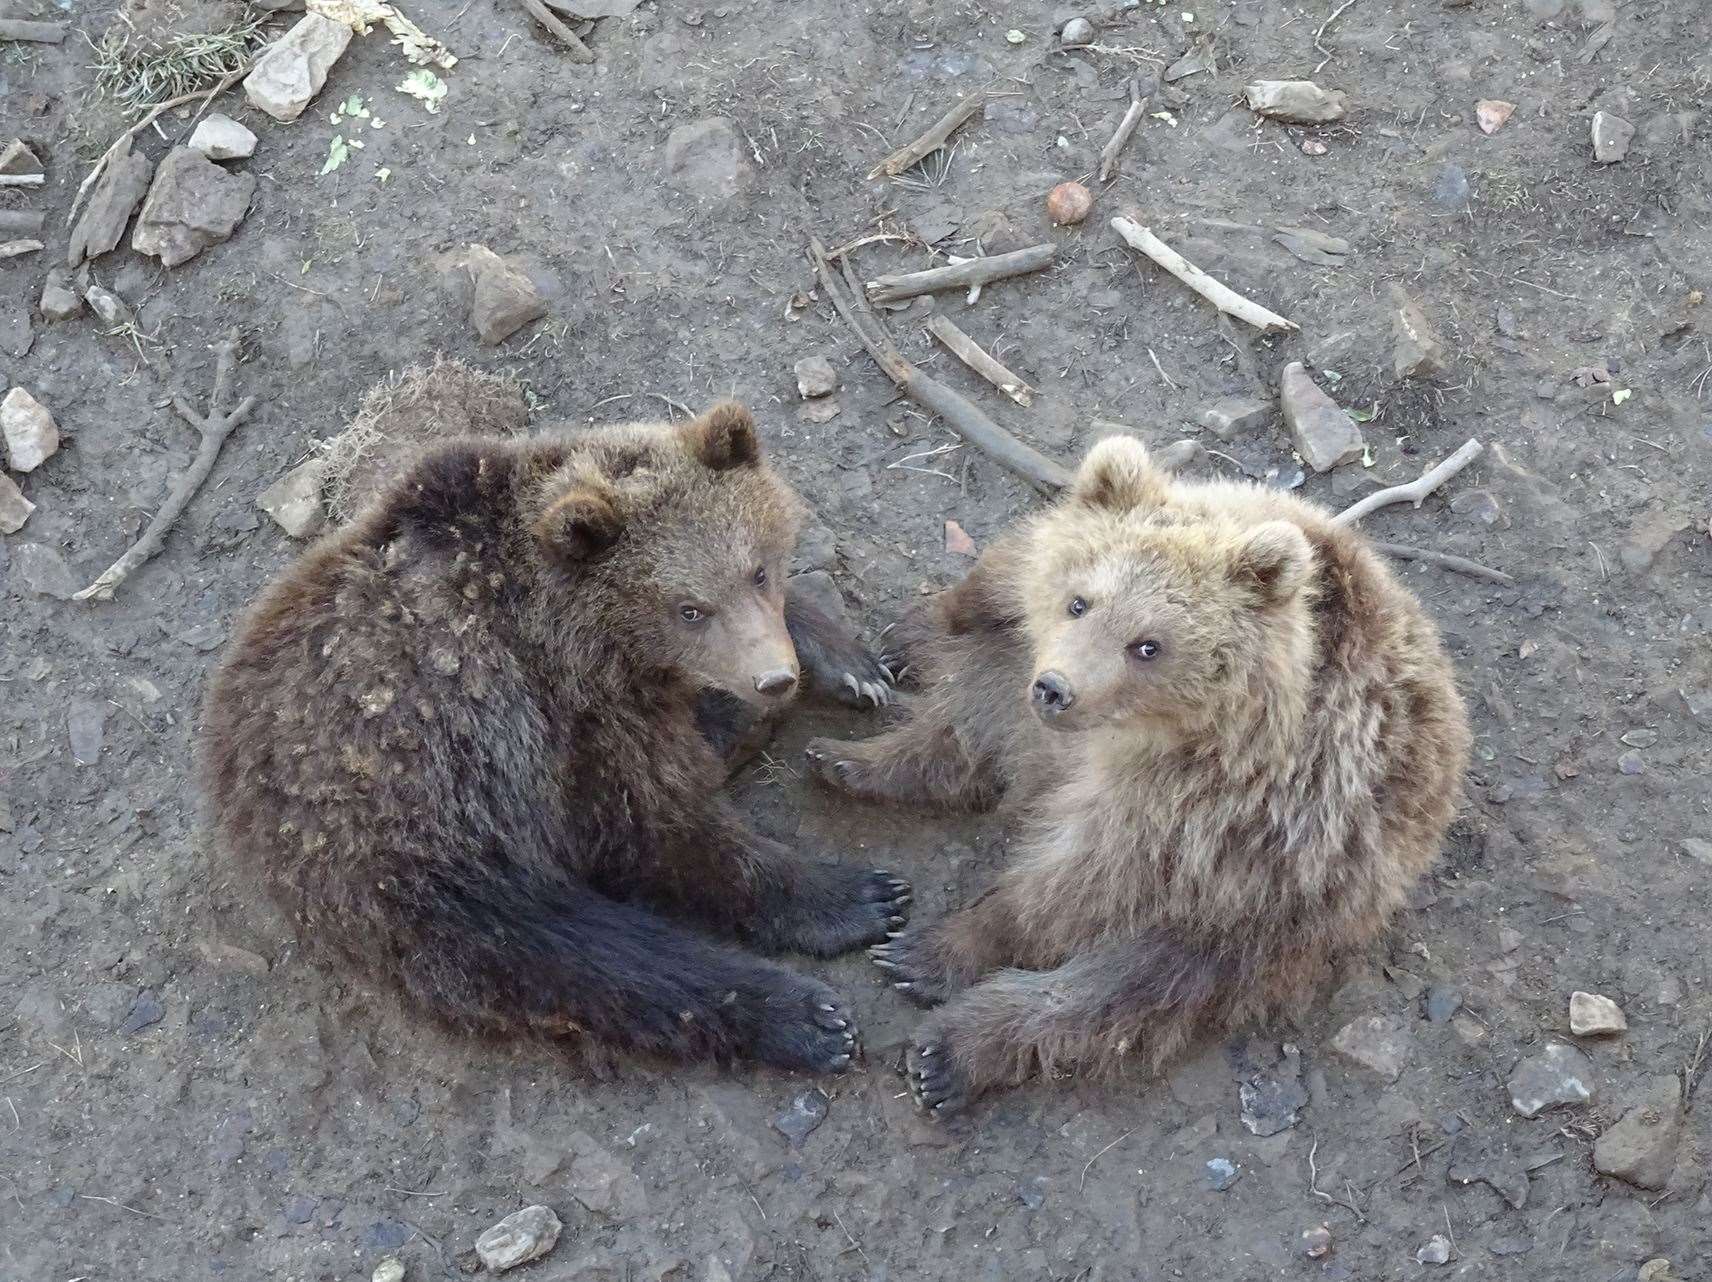 Two of the bear cubs